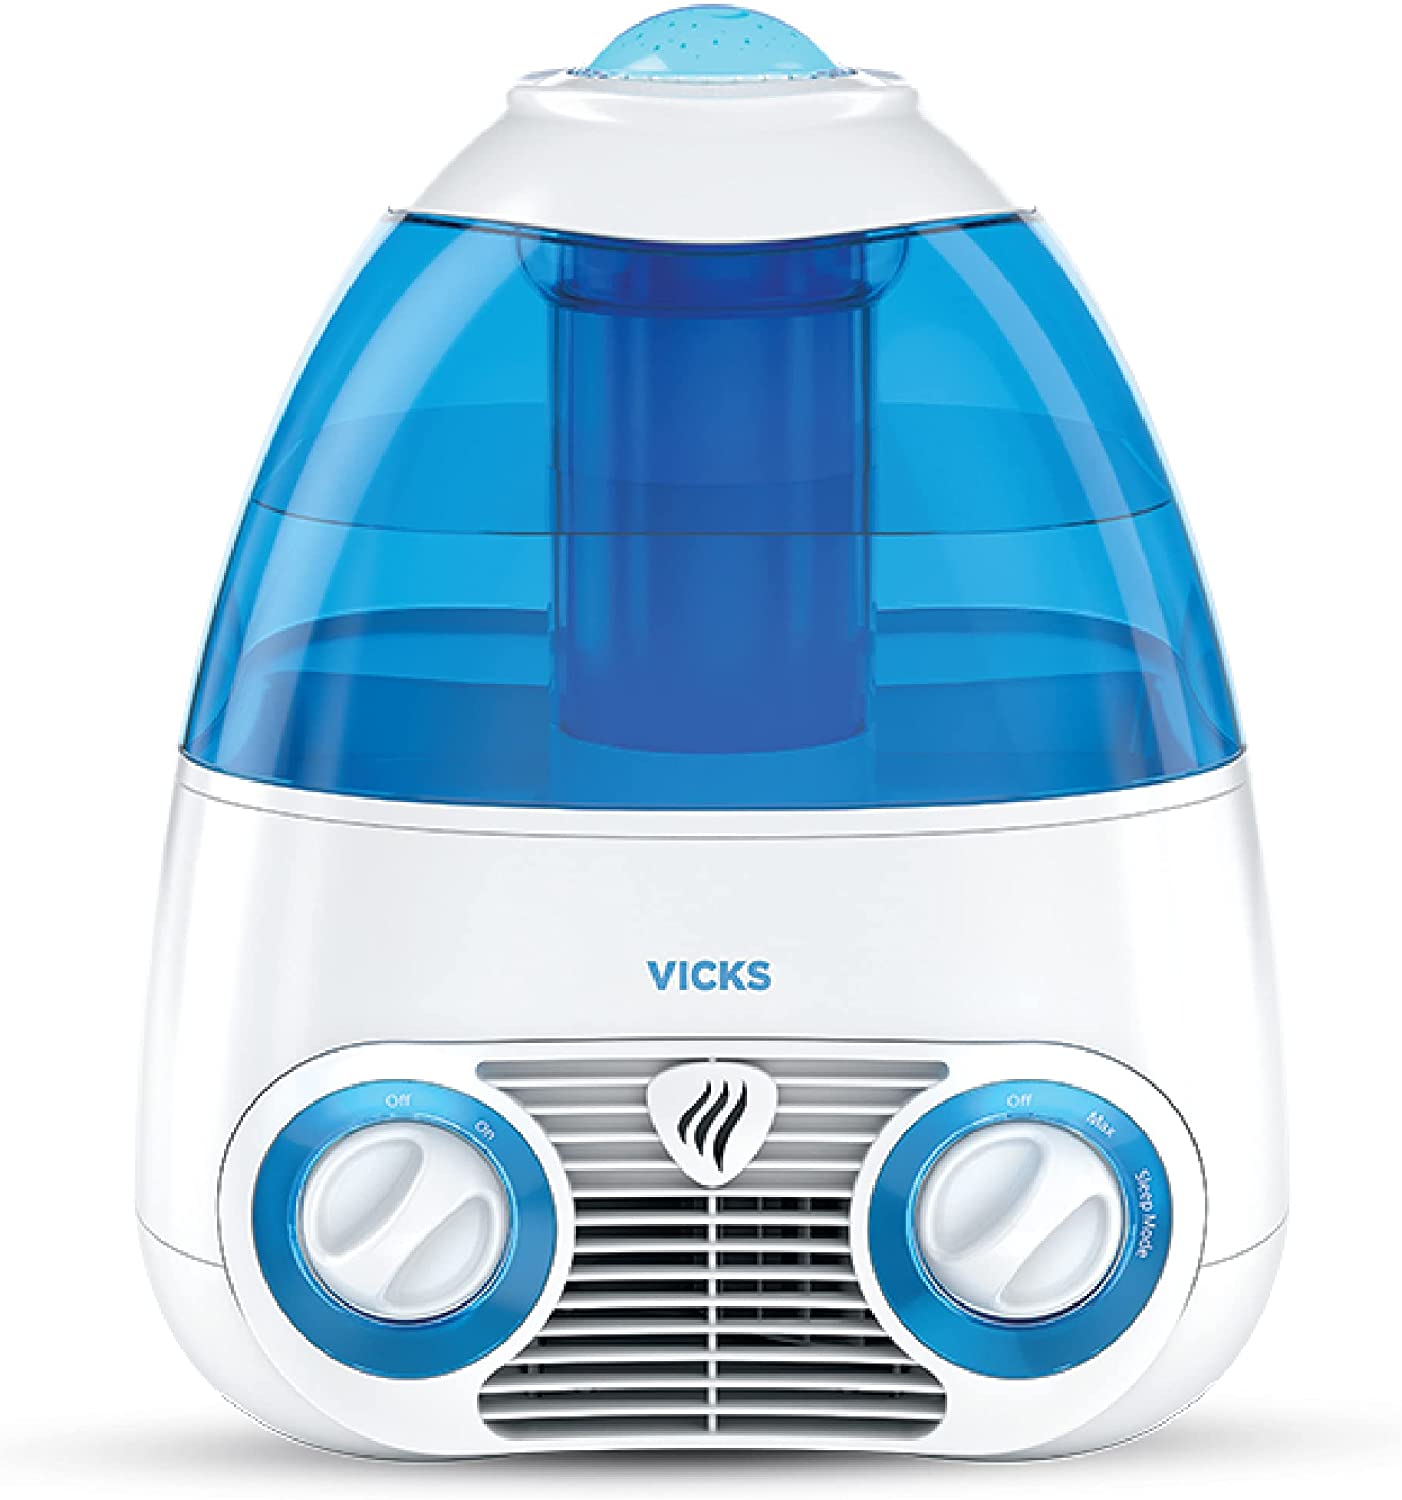 Vicks Starry Night Filtered Cool Mist Humidifier Review